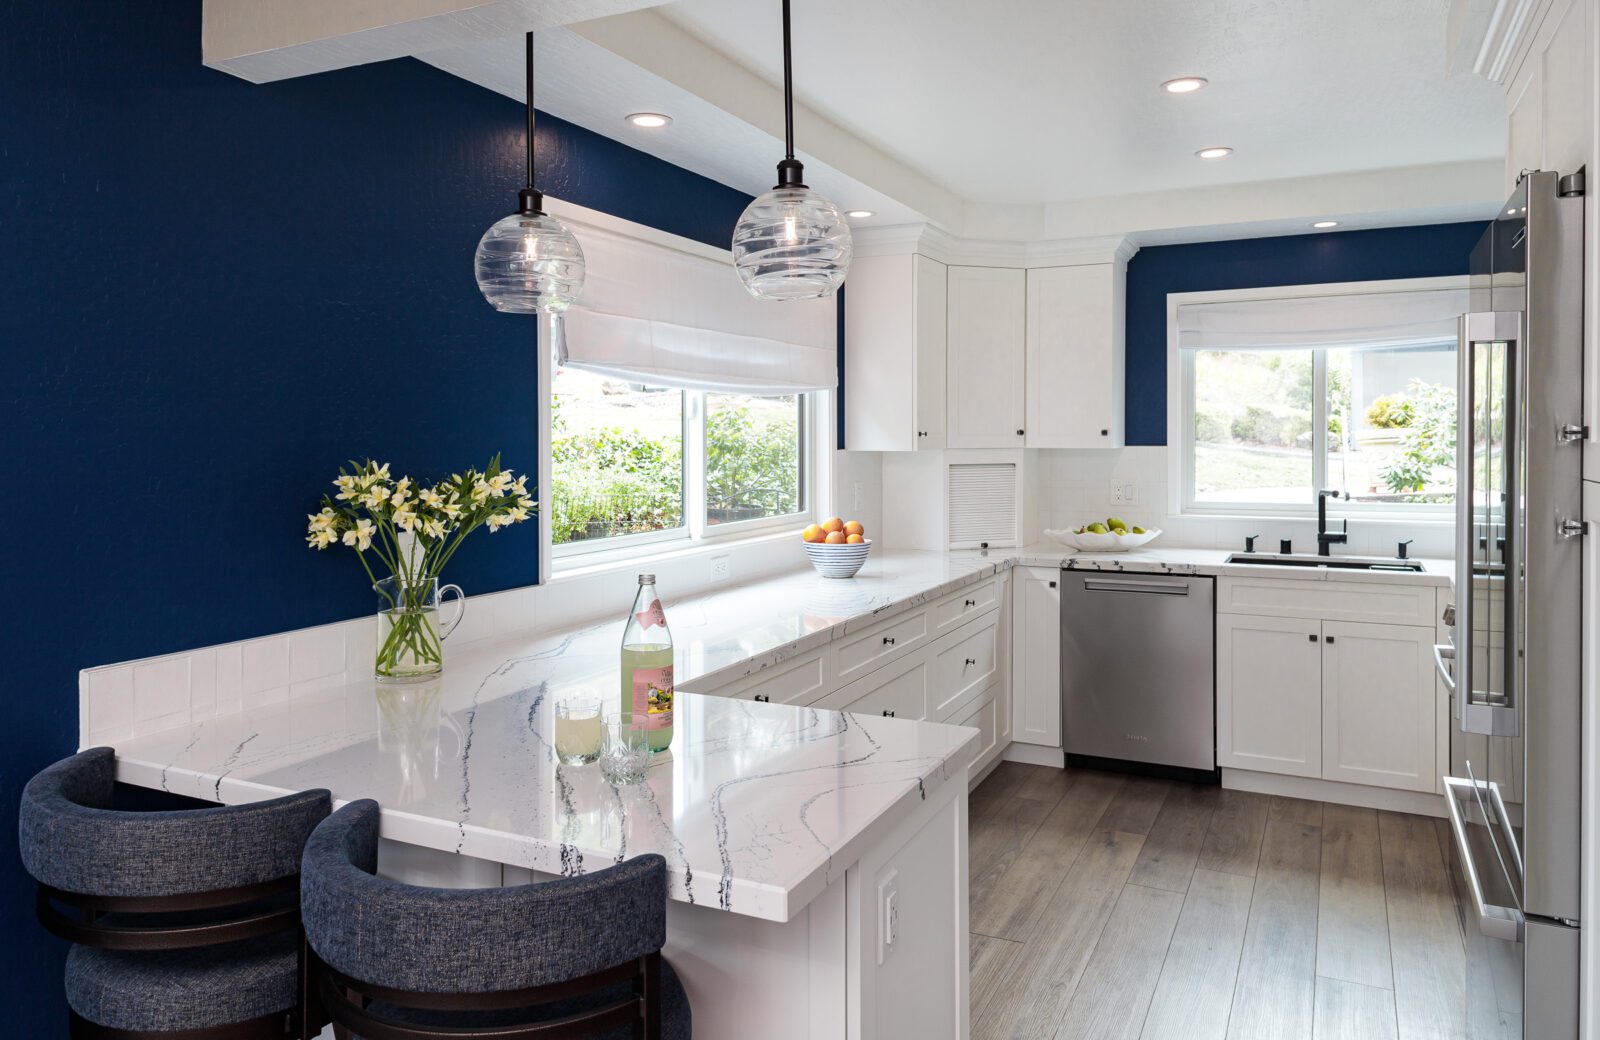 Small blue white kitchen remodel with peninsula seating lvp floor blue accent wall